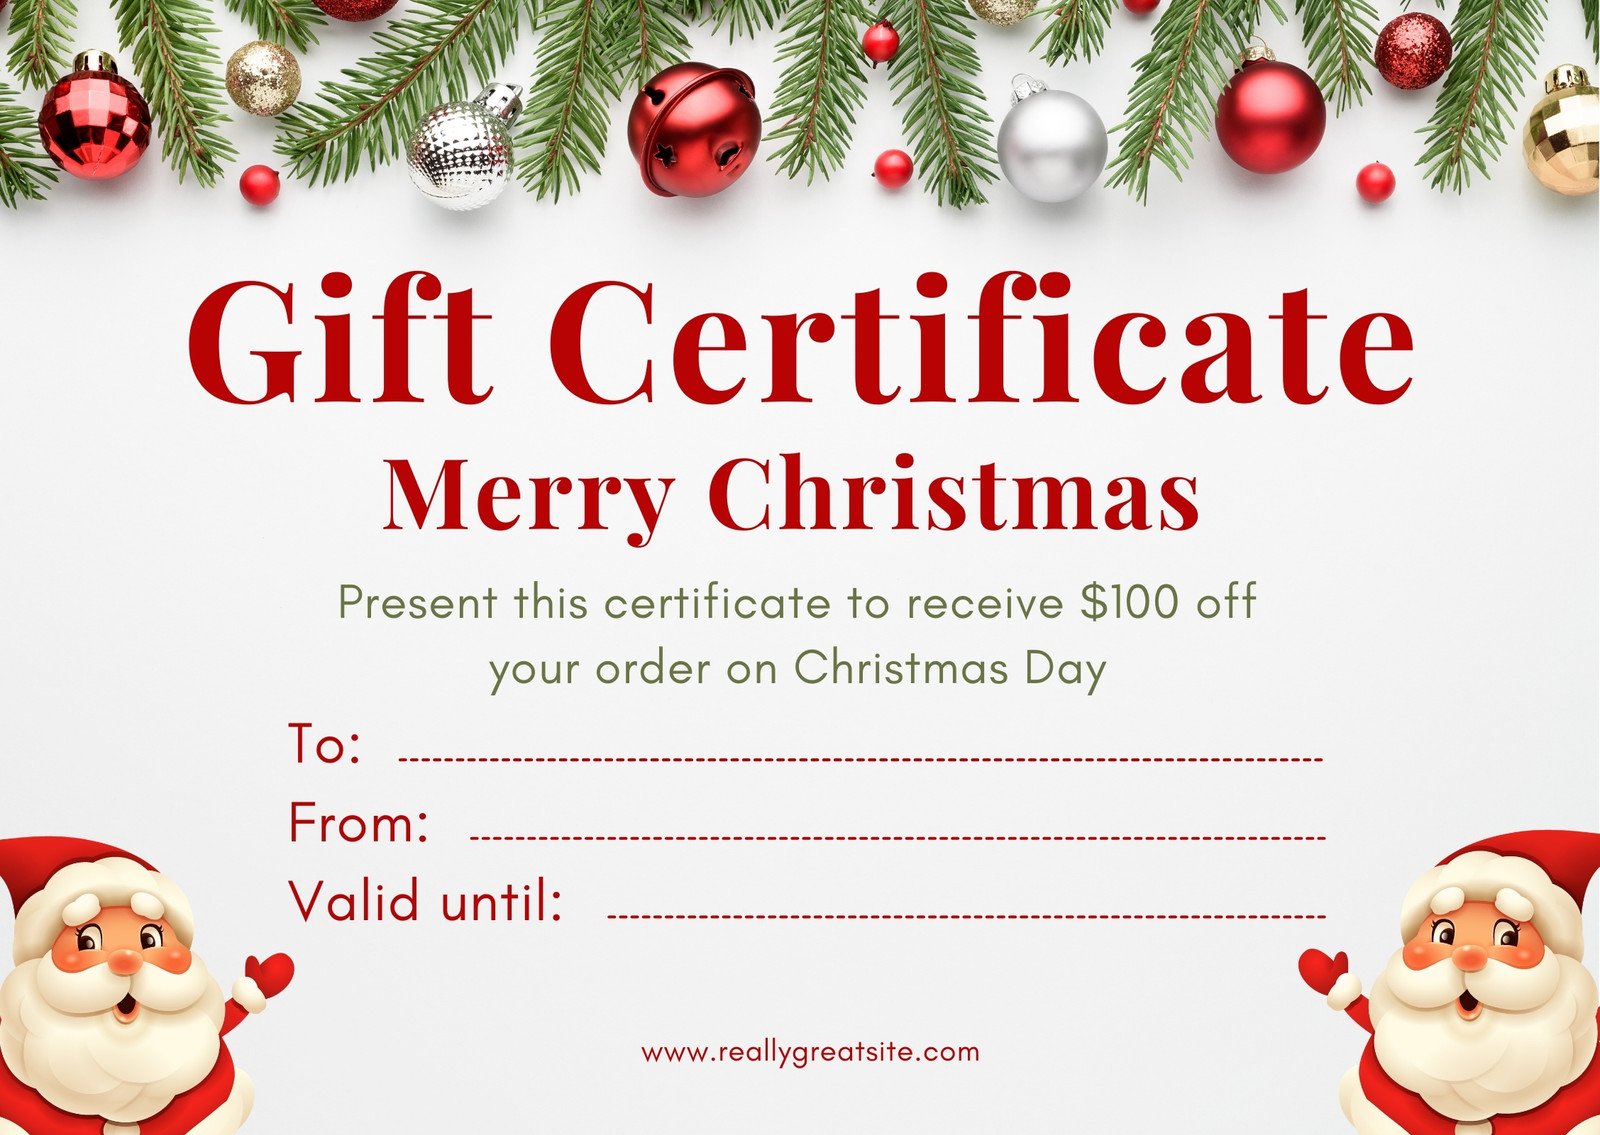 Free Christmas Certificate Templates